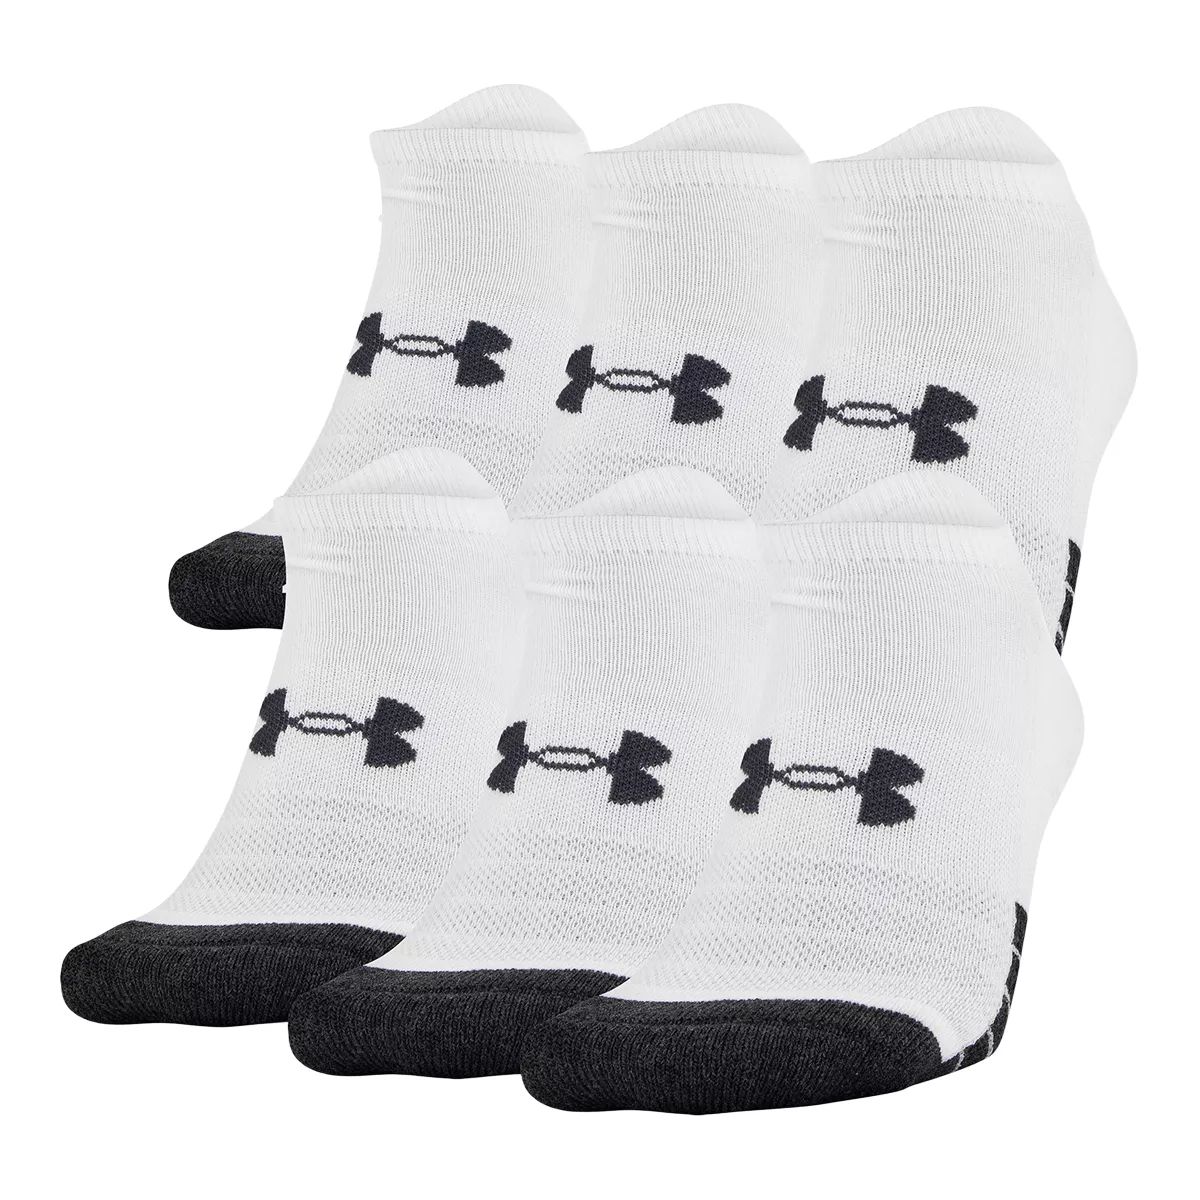 Under Armour Men's Performance No-Show Socks, Moisture-Wicking, 6-Pack ...